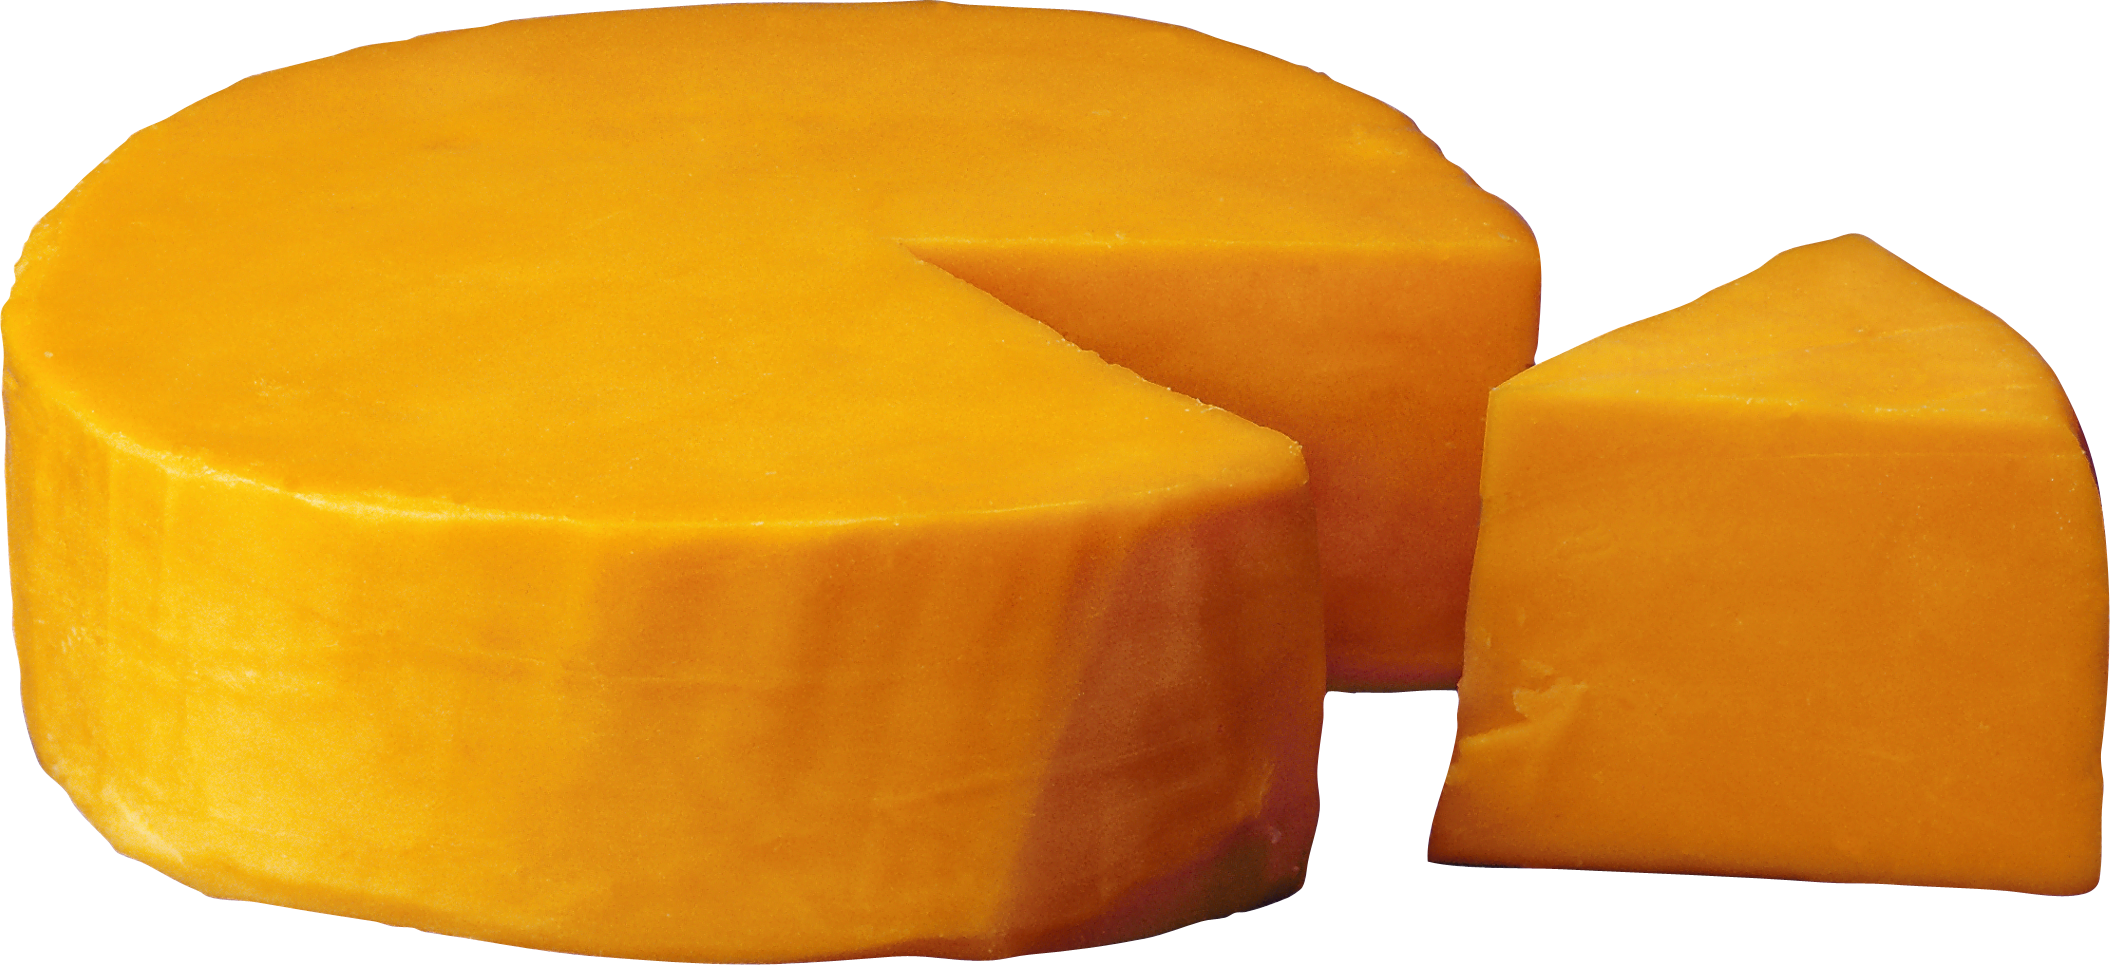 Cheese HD PNG - 90413